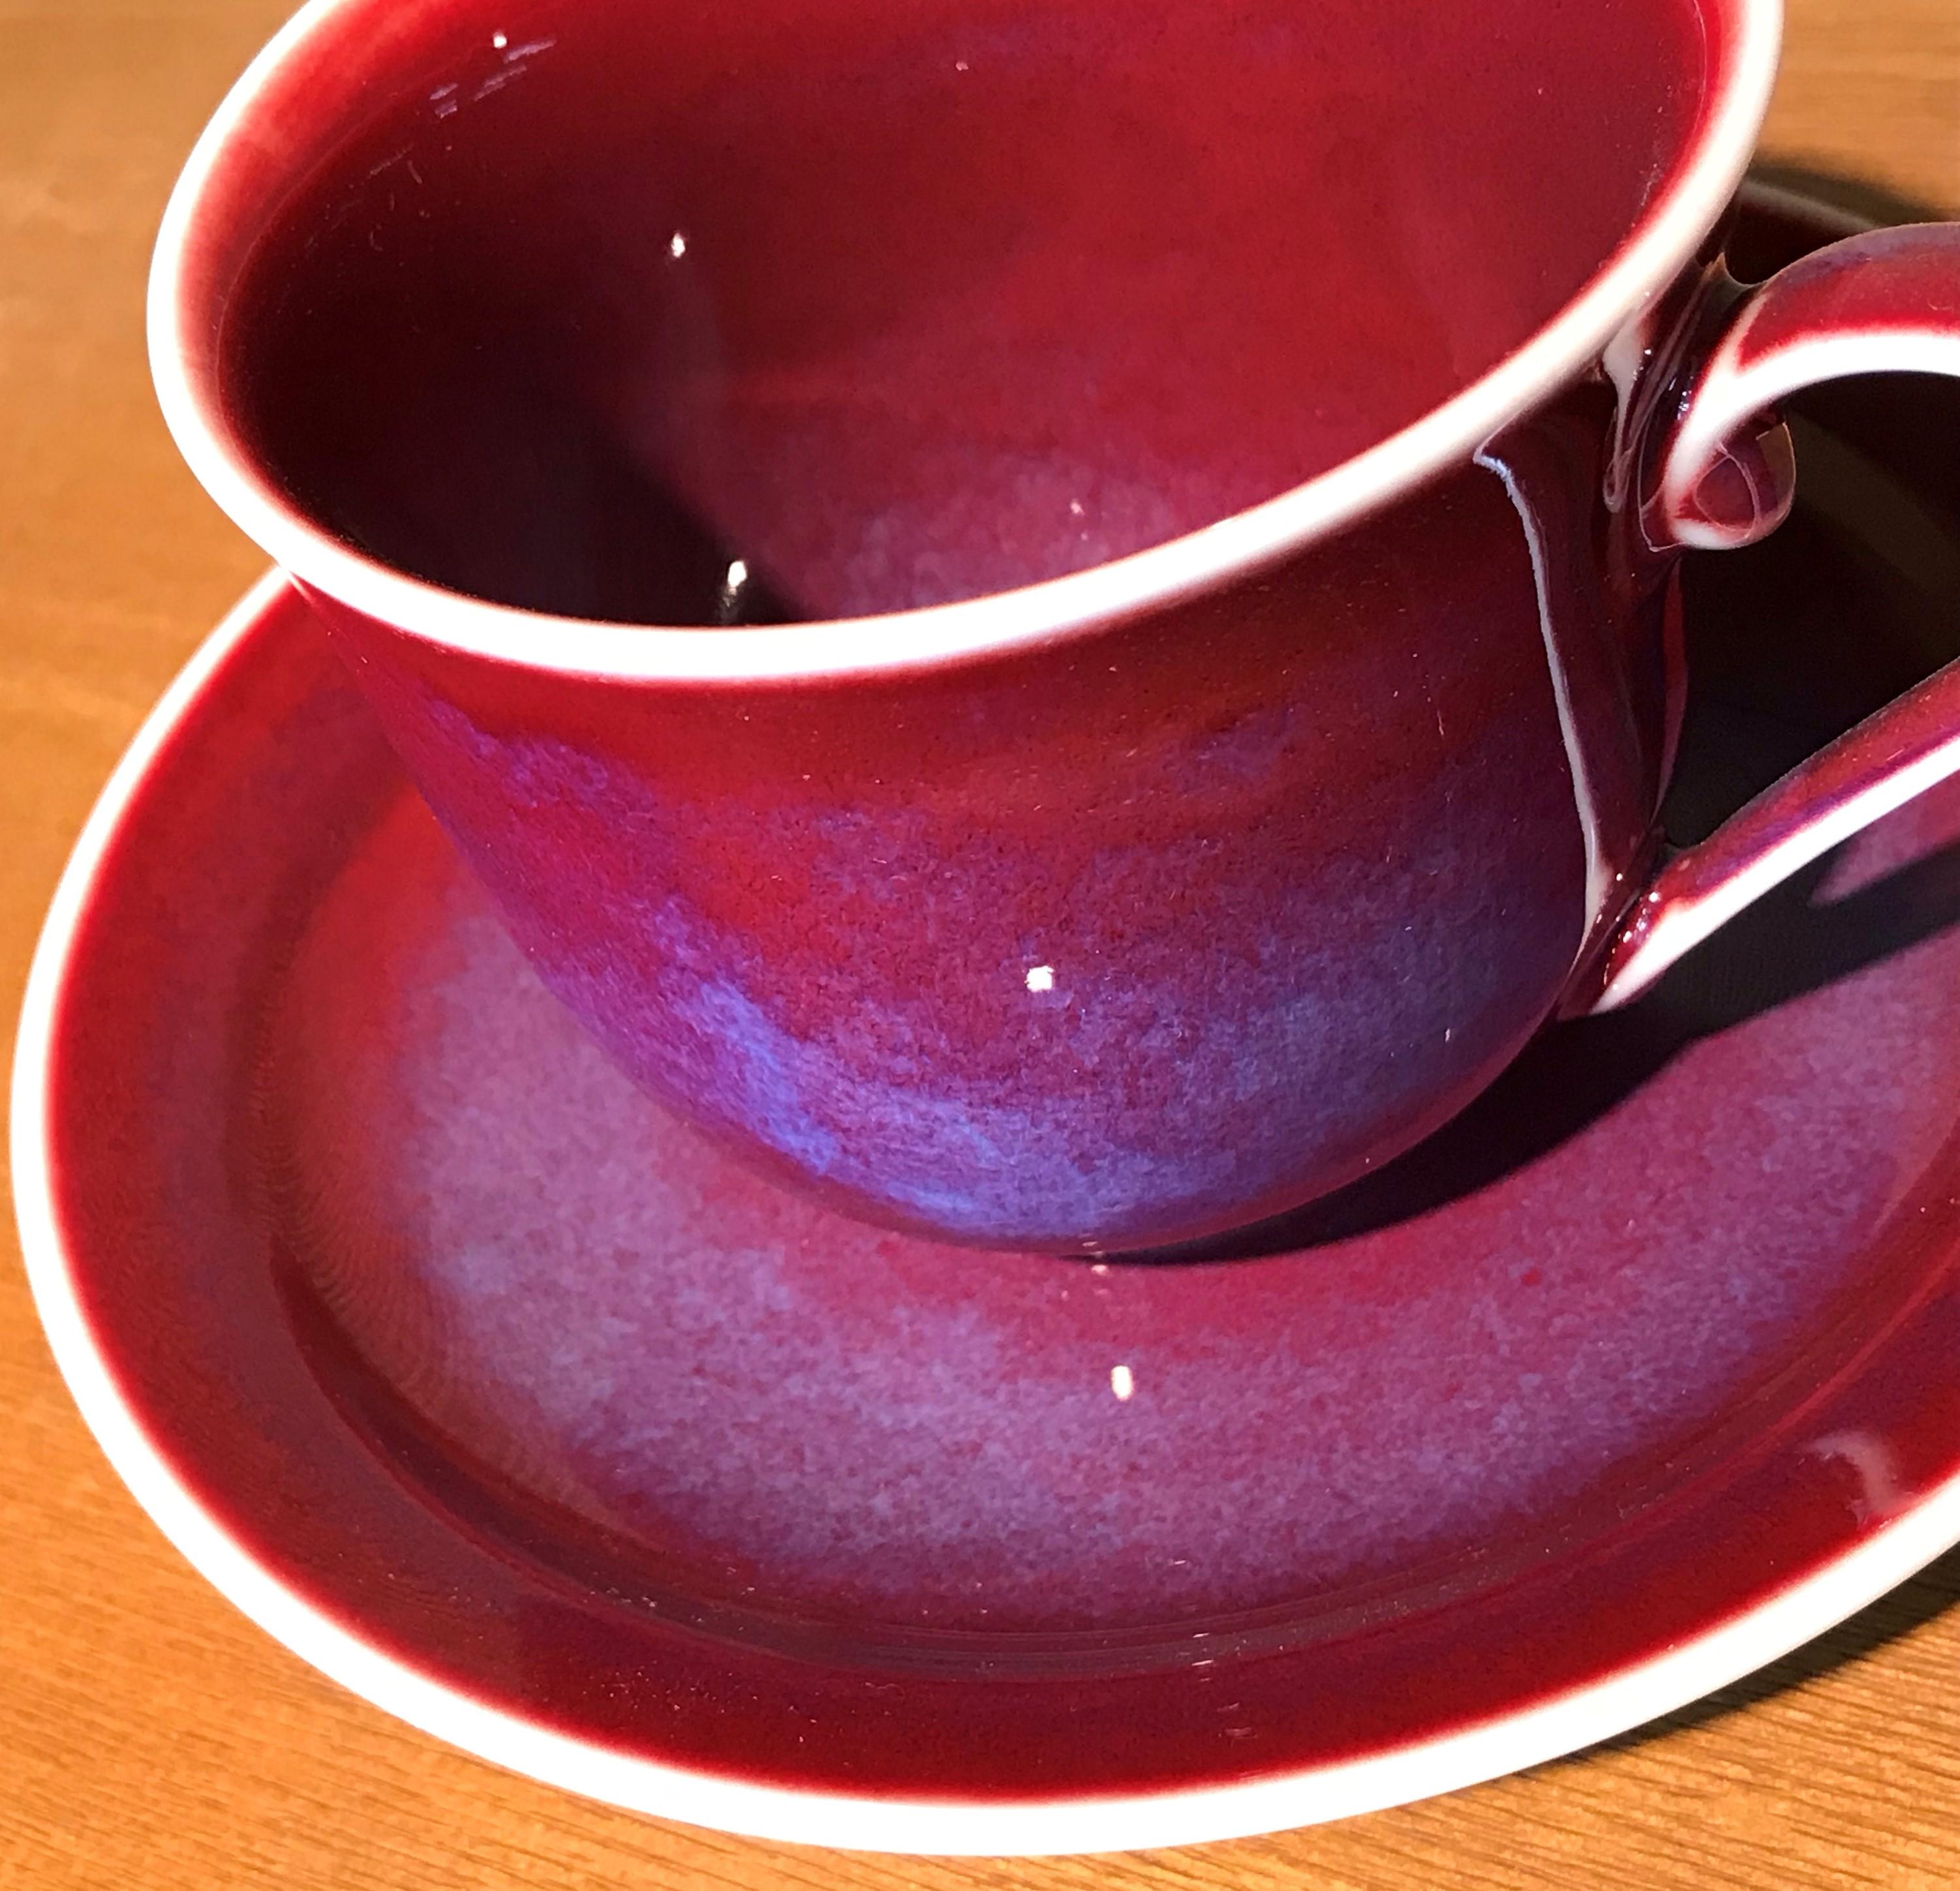 Hand-Painted Japanese Hand-Glazed Red Blue Porcelain Cup and Saucer by Master Artist, 2018